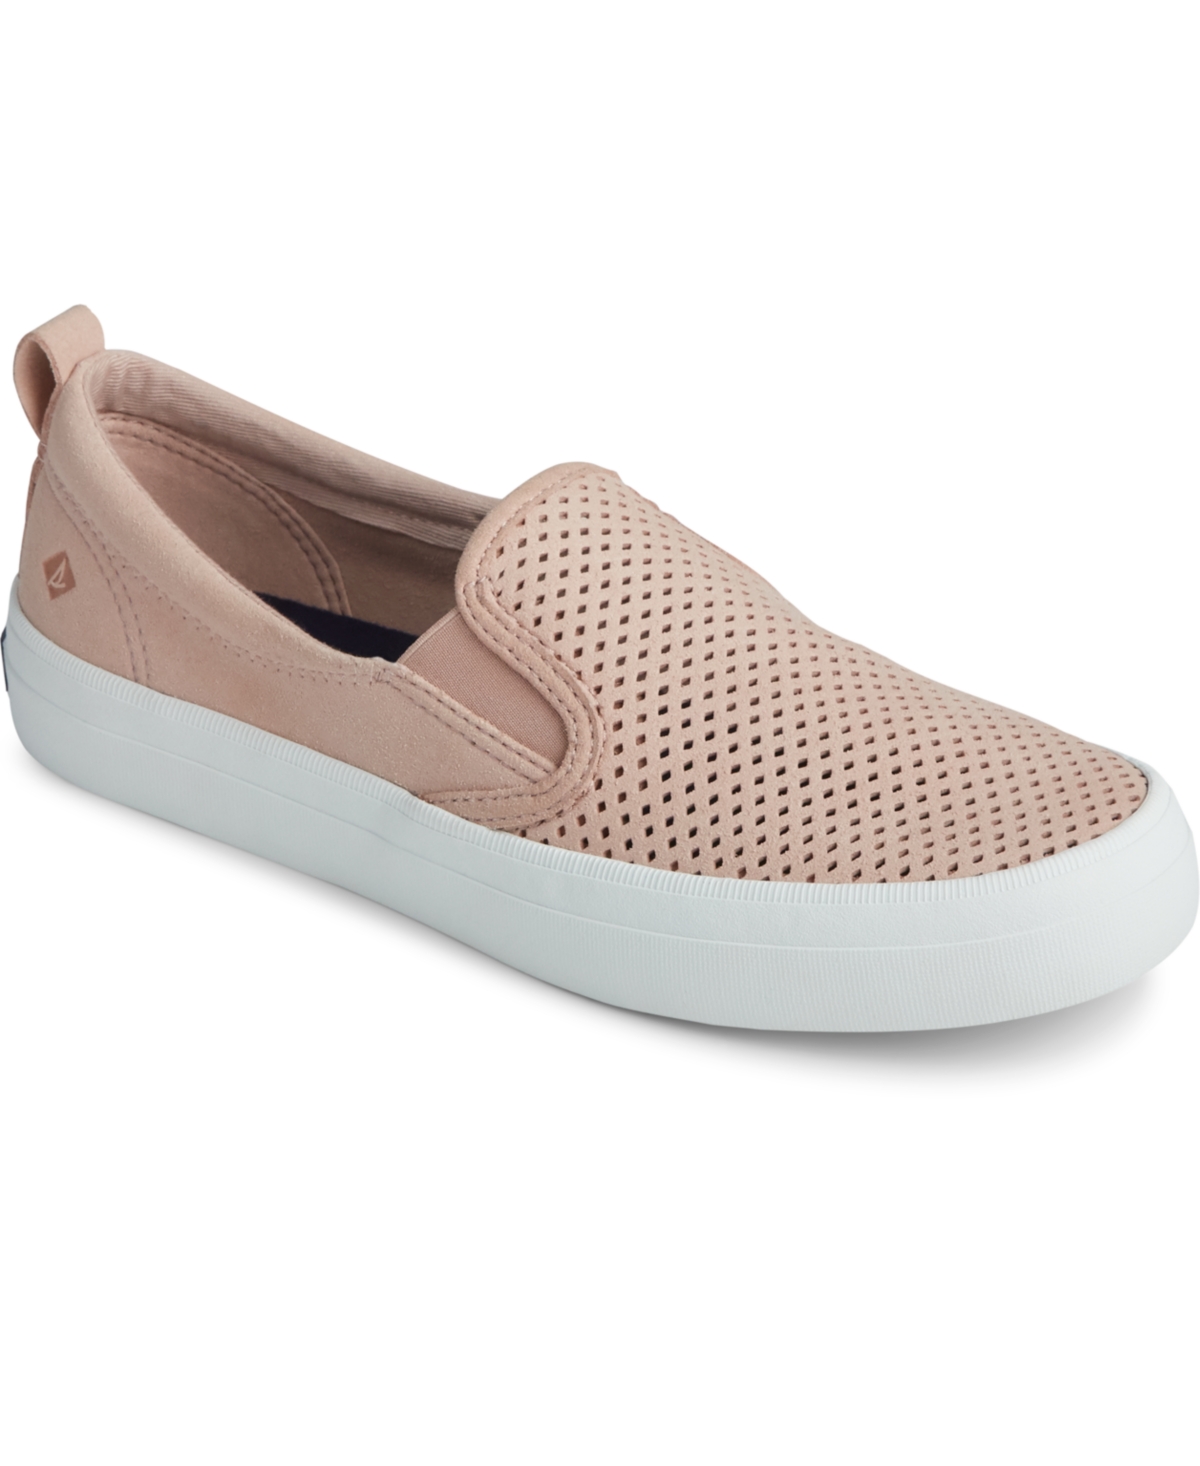 Women's Crest Twin Gore Perforated Slip On Sneakers, Created for Macy's - Rose Dust